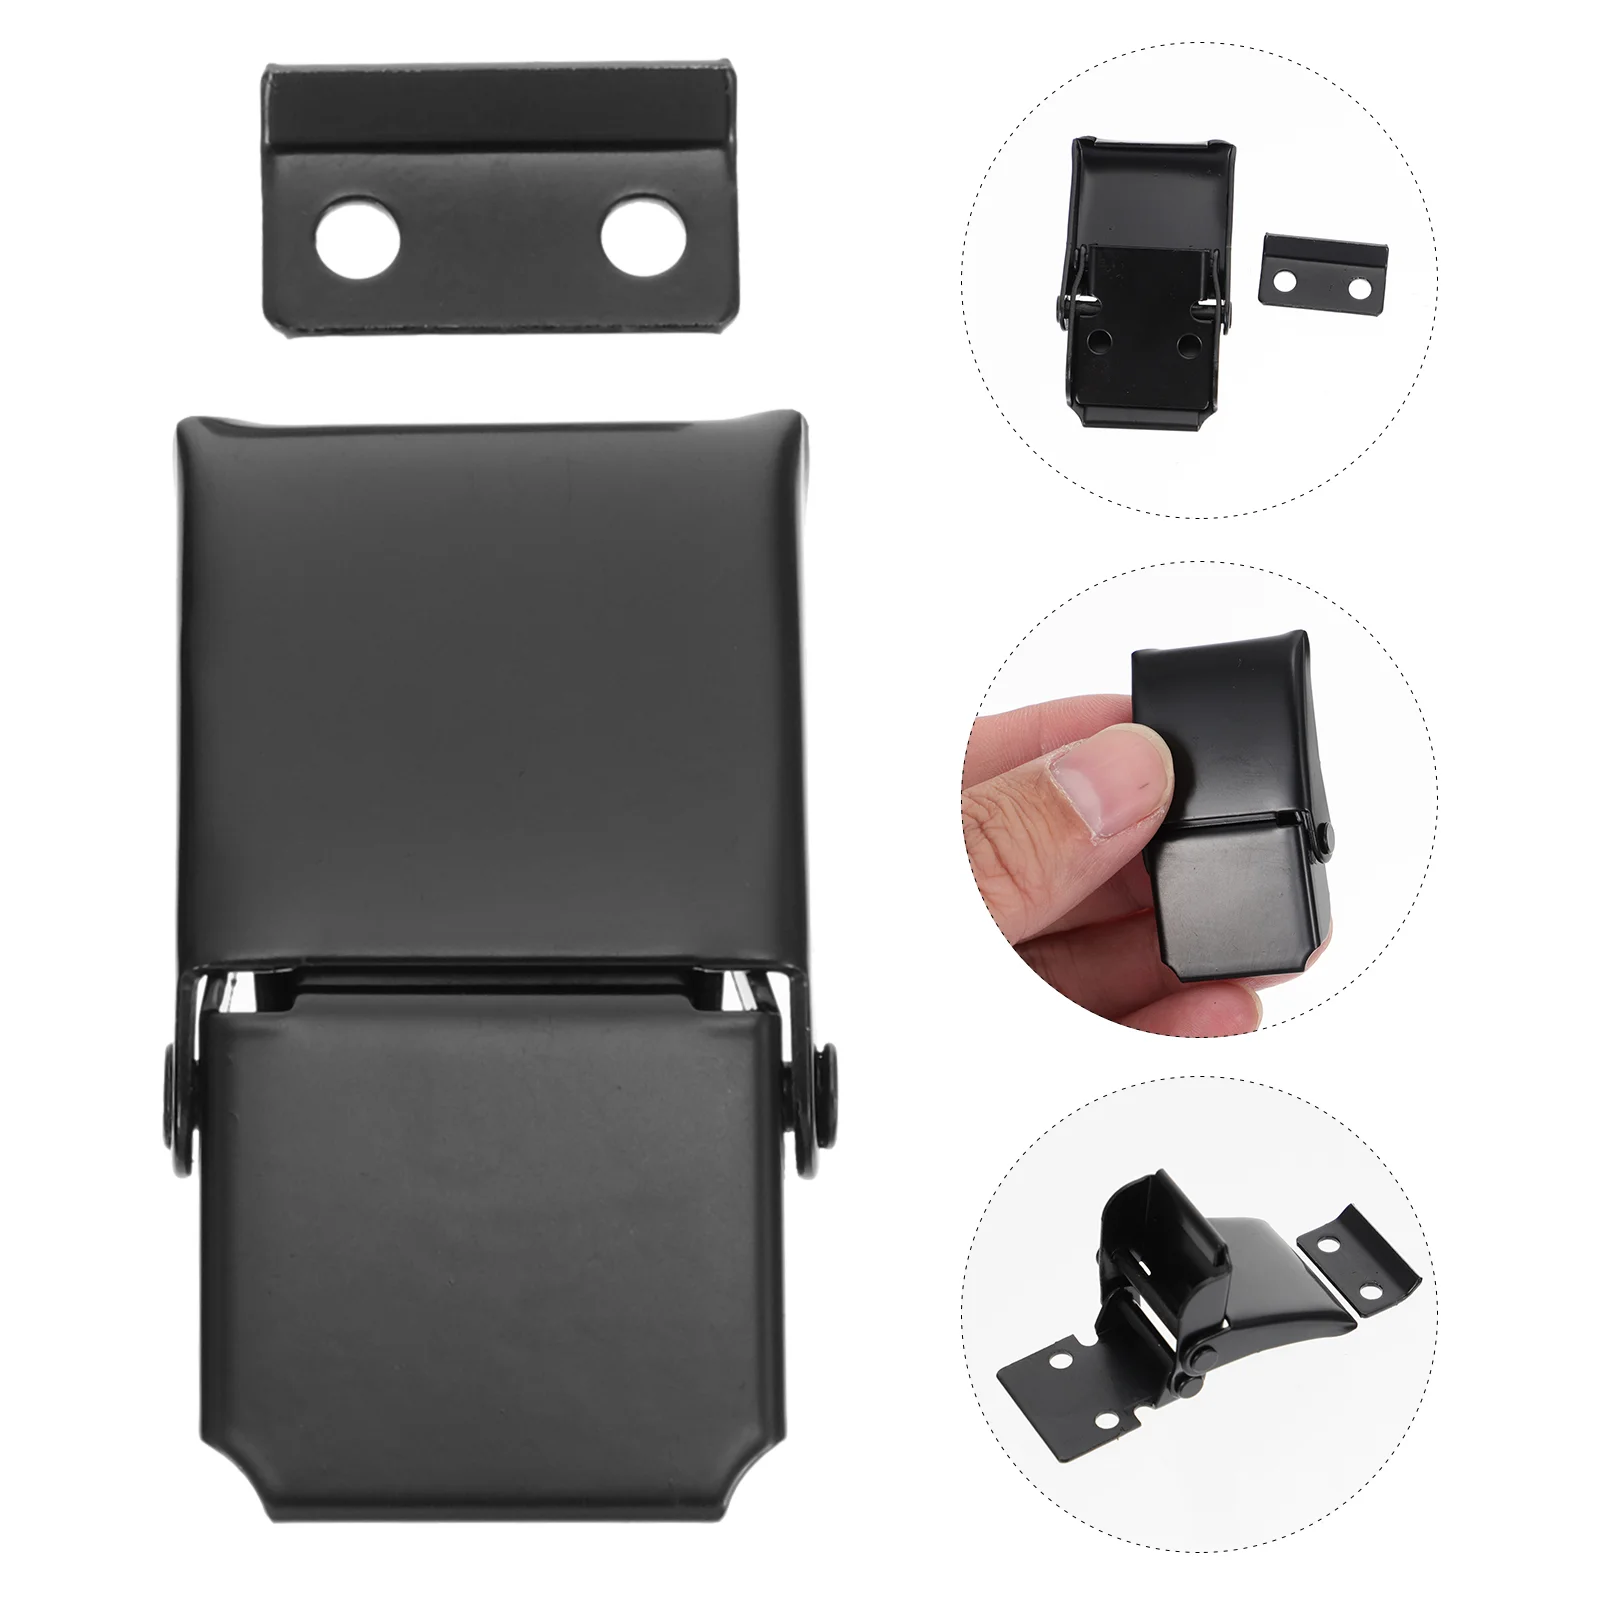 

Lock Loaded Catch Hasp Spring Toggle Buckle Box Clamp Draw Latches Case Clamps Stainless Steel Luggage Clip Trunk Suitcase